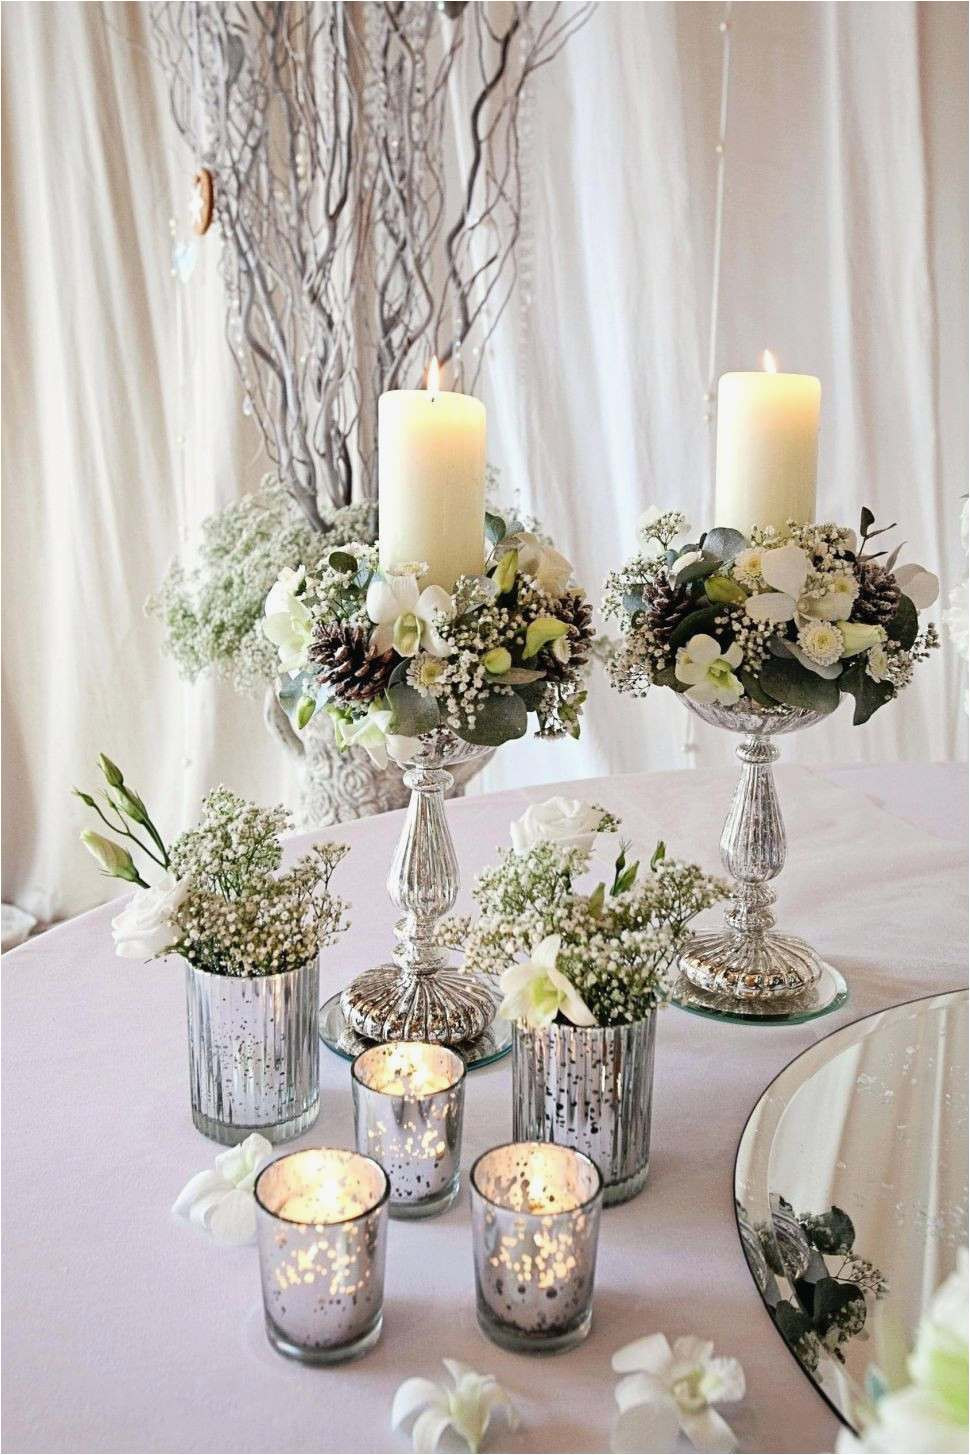 19 Lovable Tall Glass Candle Vases 2024 free download tall glass candle vases of 28 cool wedding reception decoration ideas trending best wedding for cool living room vases wholesale new h vases big tall i 0d for cheap design wedding